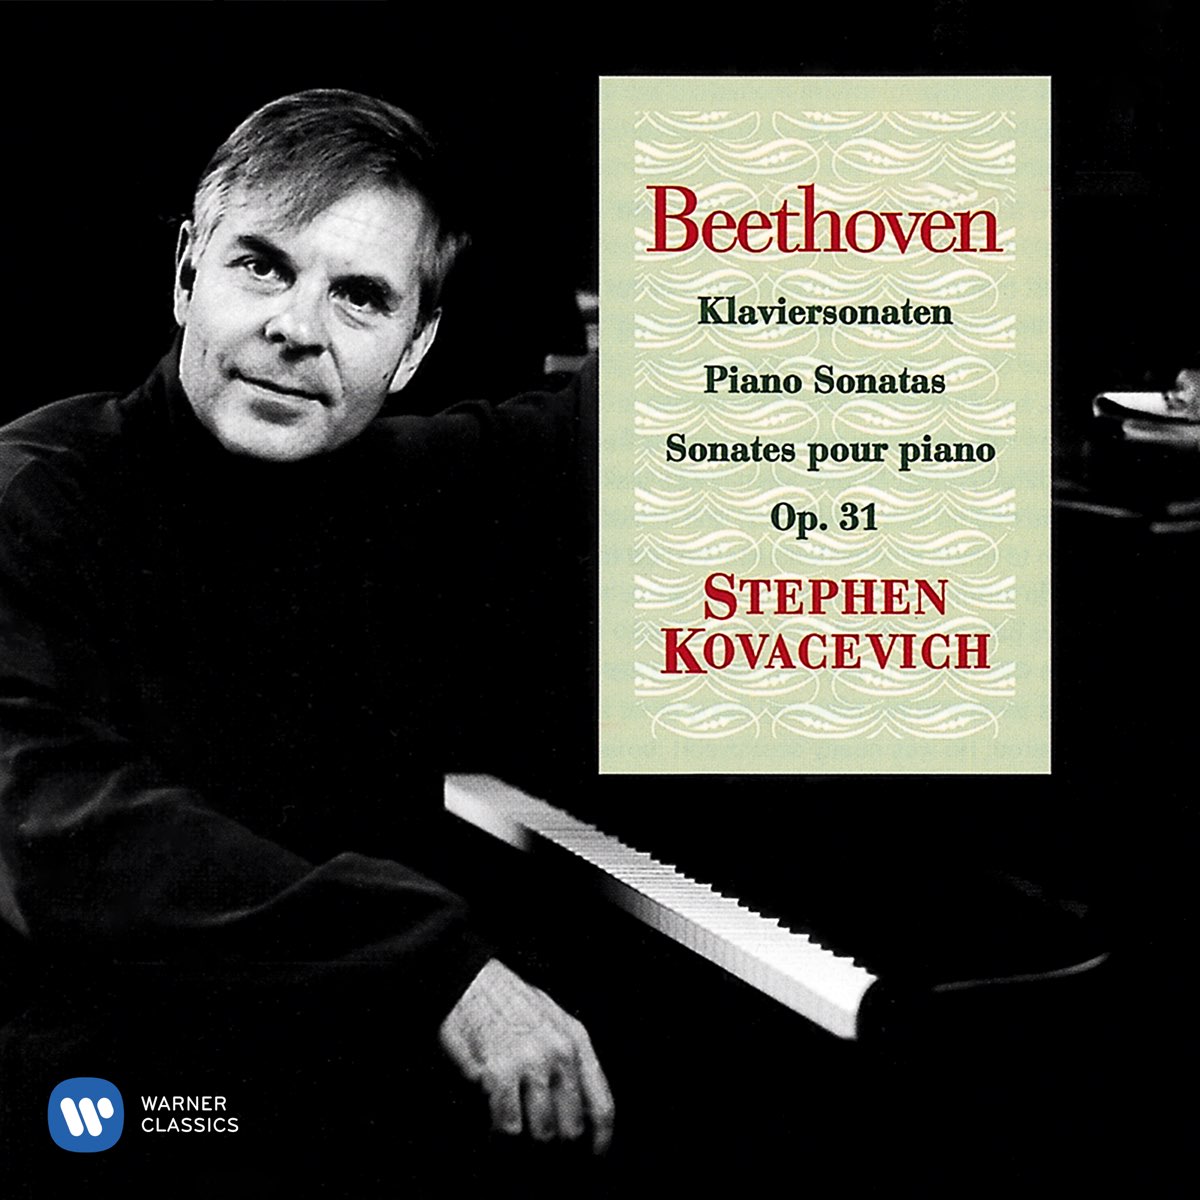 Beethoven: Piano Sonatas Nos. 16, 17 & 18, Op. 31 by Stephen Kovacevich on  Apple Music